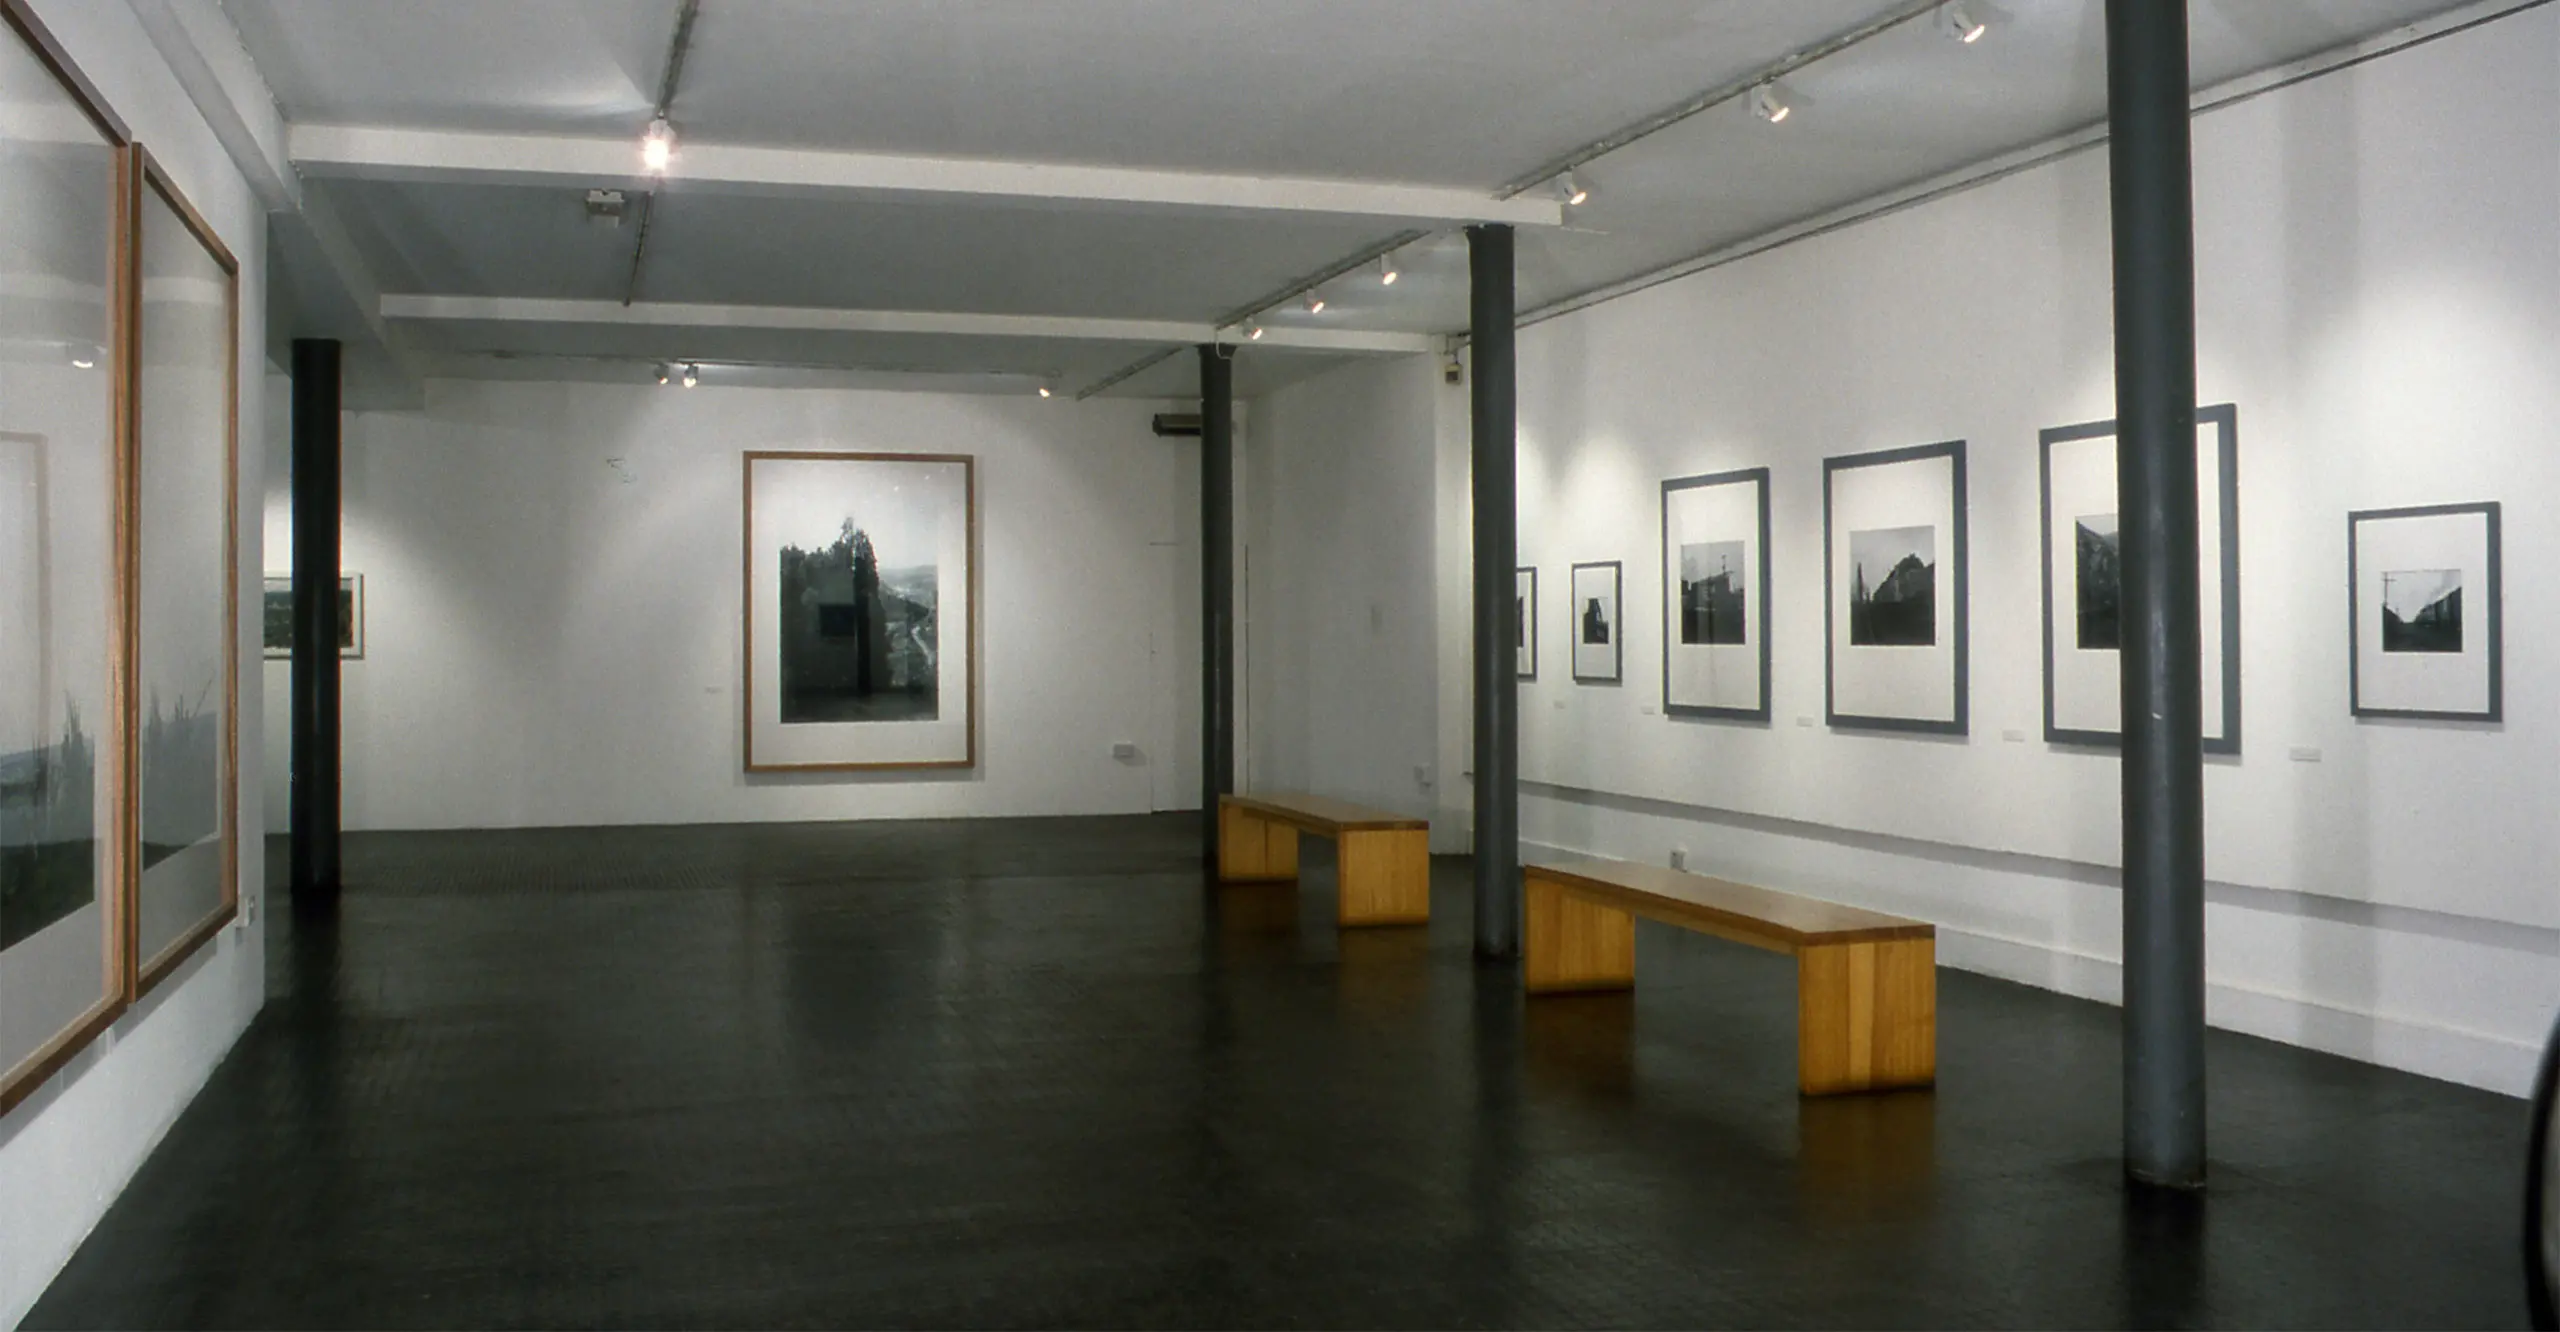 Evident: New Landscape Photography. Installation image courtesy The Photographers' Gallery Archive, 1996